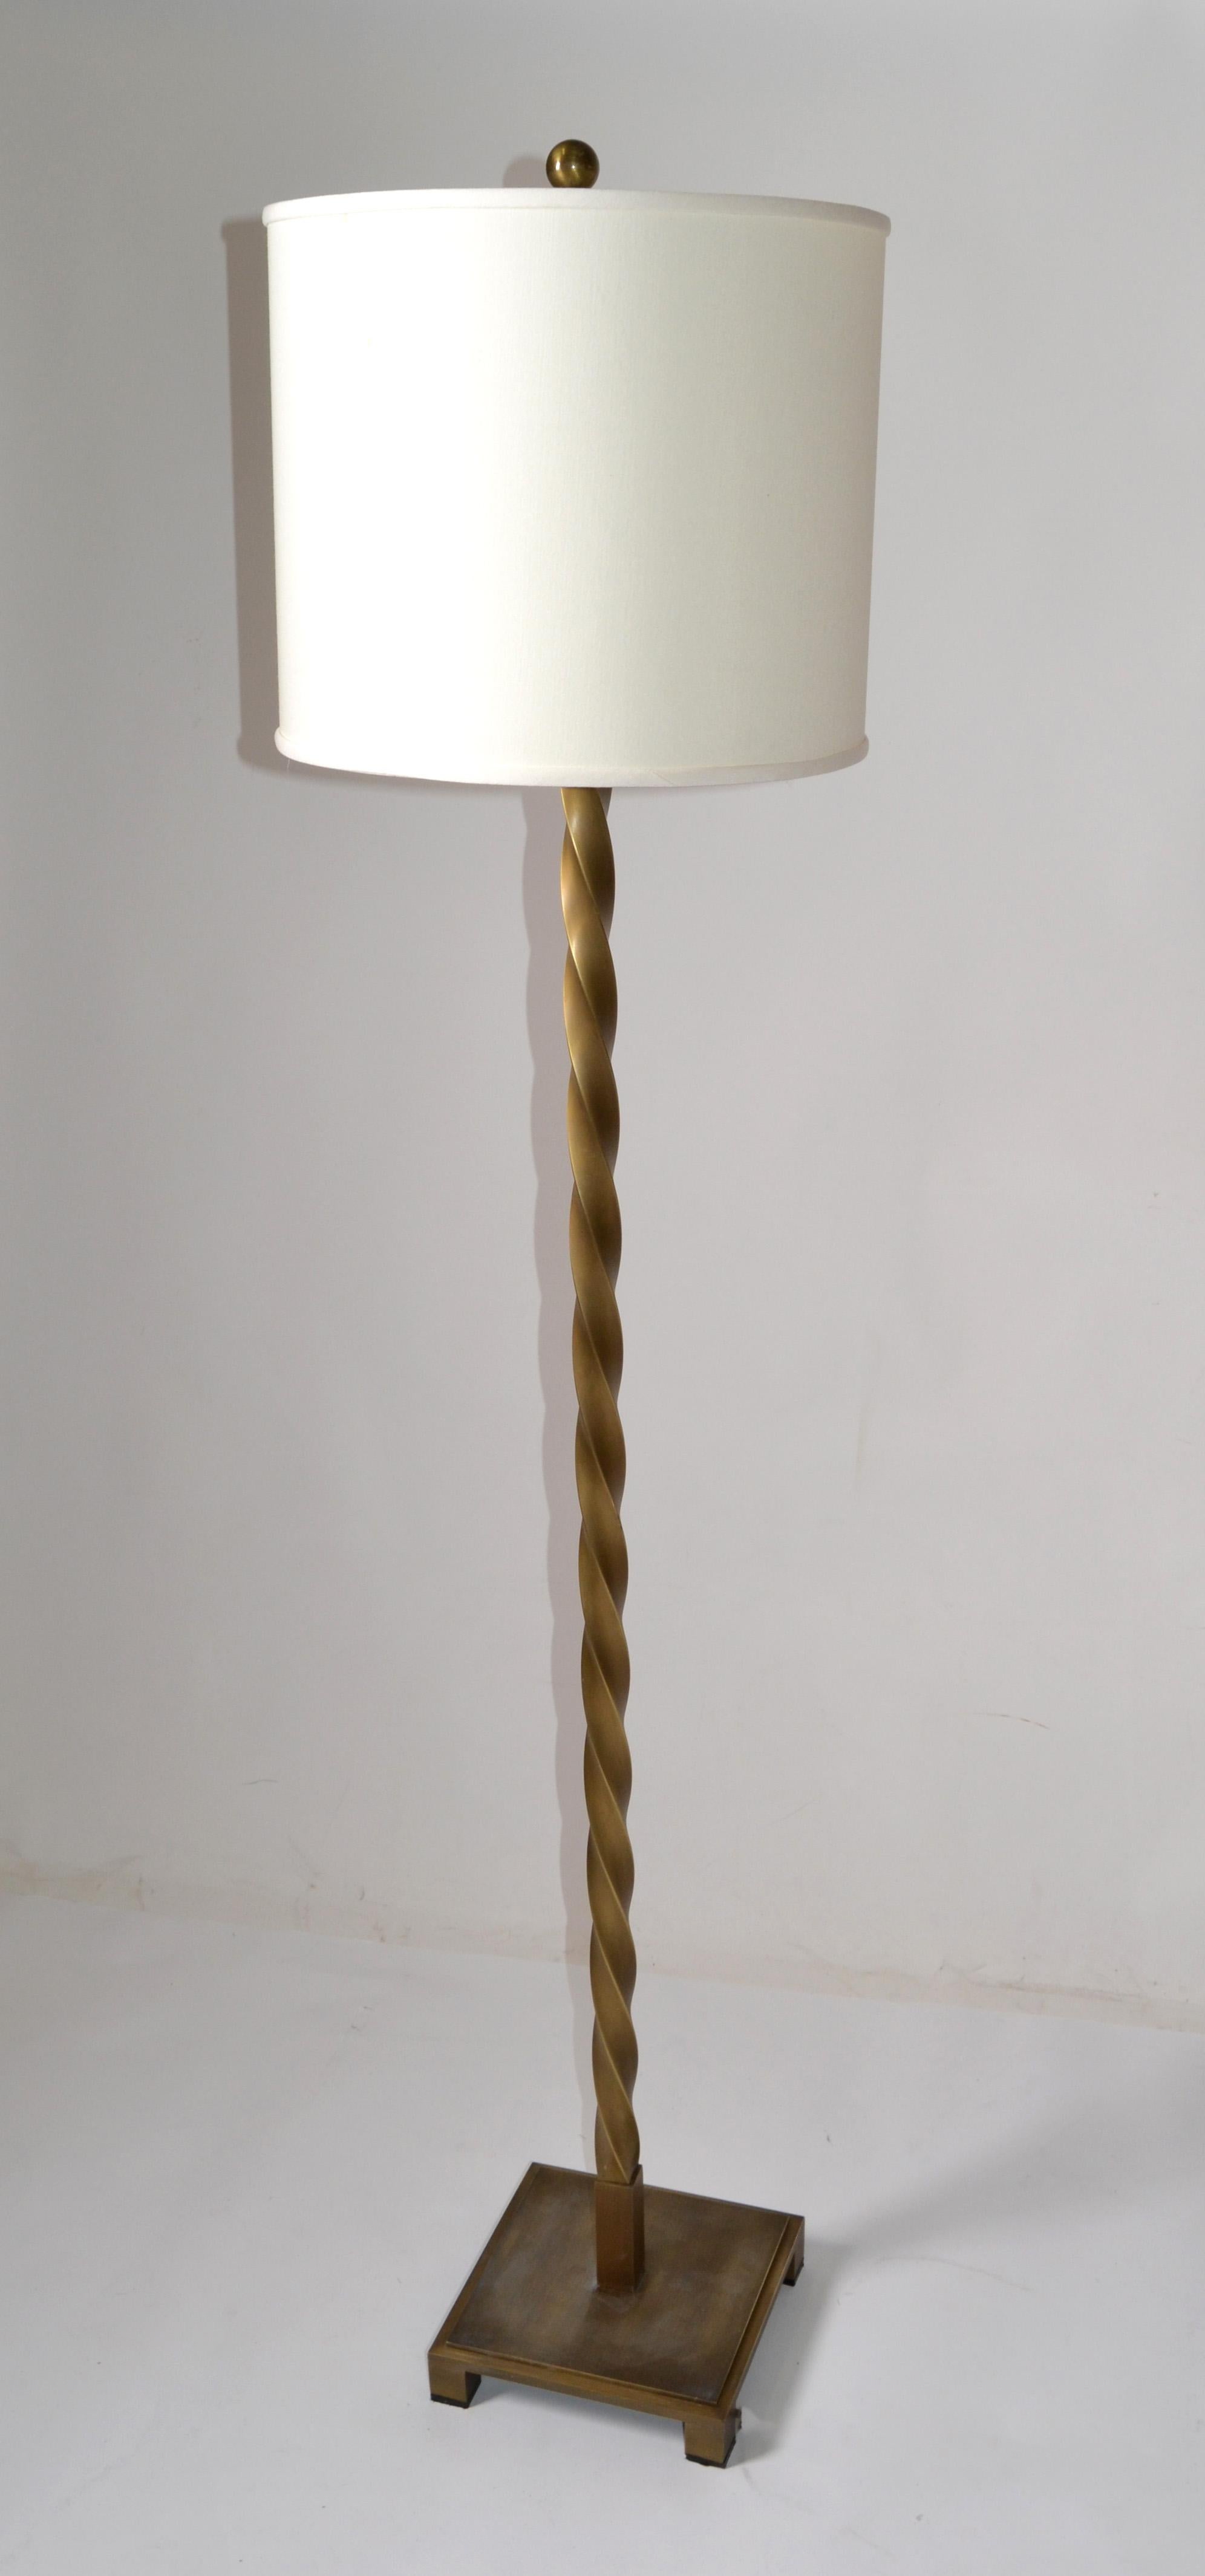 Italian Modern brushed and twisted solid bronze floor lamp or reading lamp.
UL Listed, US wired and working with a 100 W standard bulb or LED bulb.
Light tarnish and minor scratches.
Marked at the Base, UL Listed, Date 2004 & made in Italy.
NO